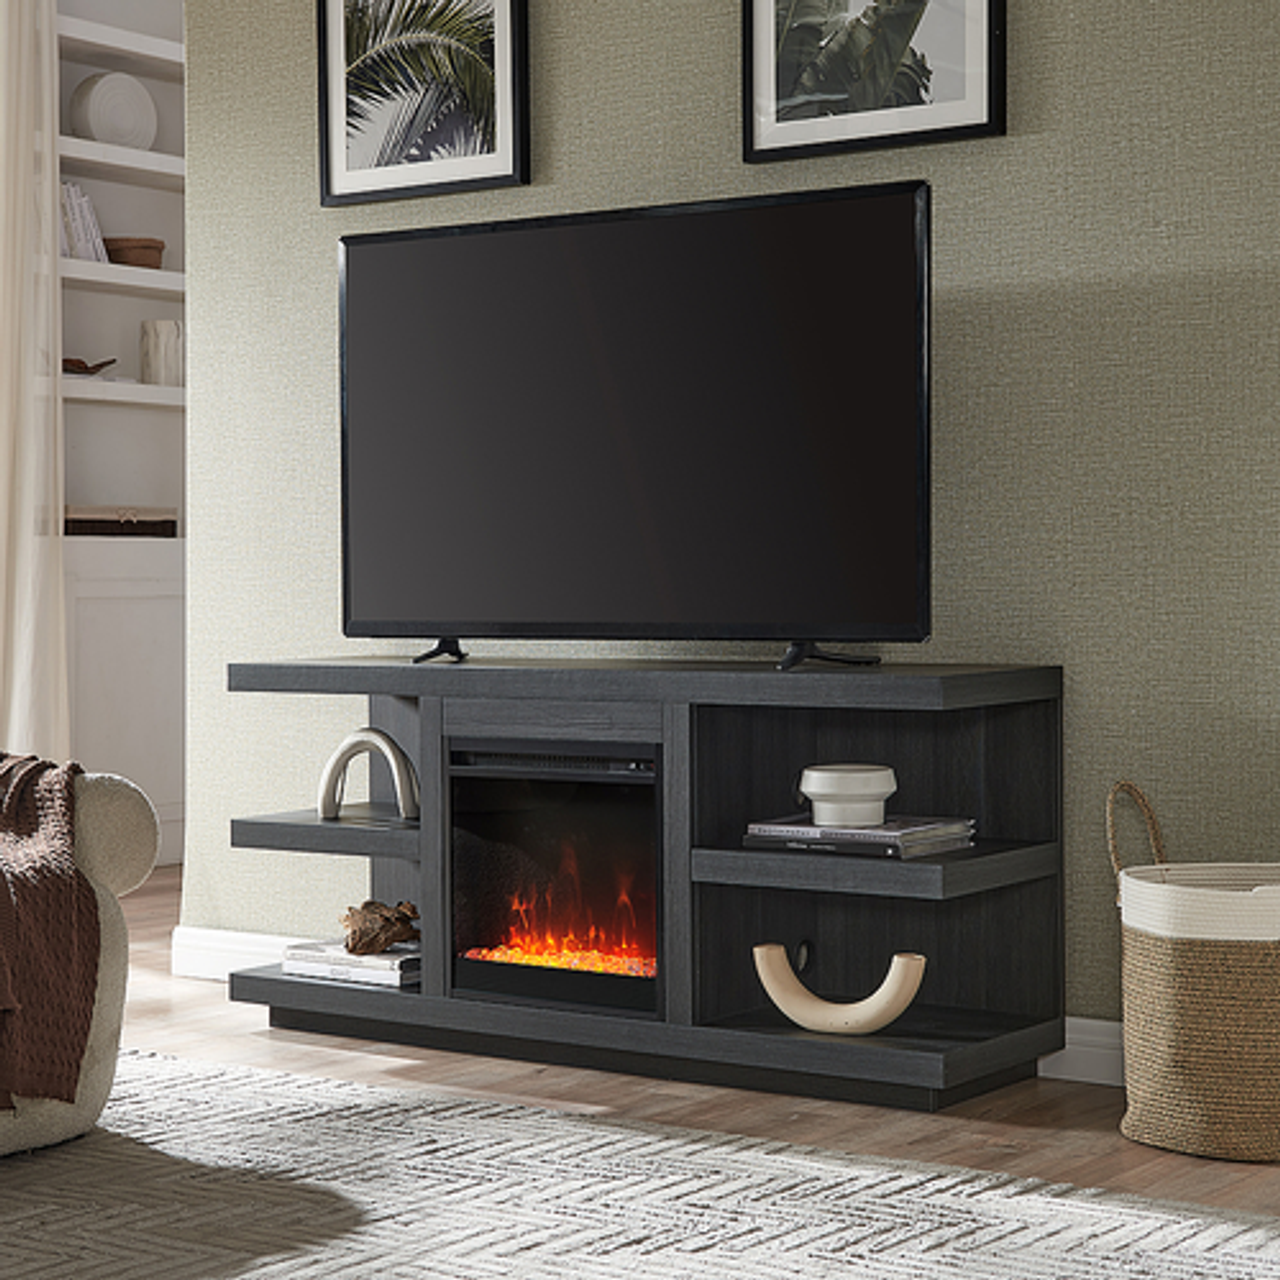 Camden&Wells - Maya Crystal Fireplace TV Stand for Most TVs up to 65" - Charcoal Gray